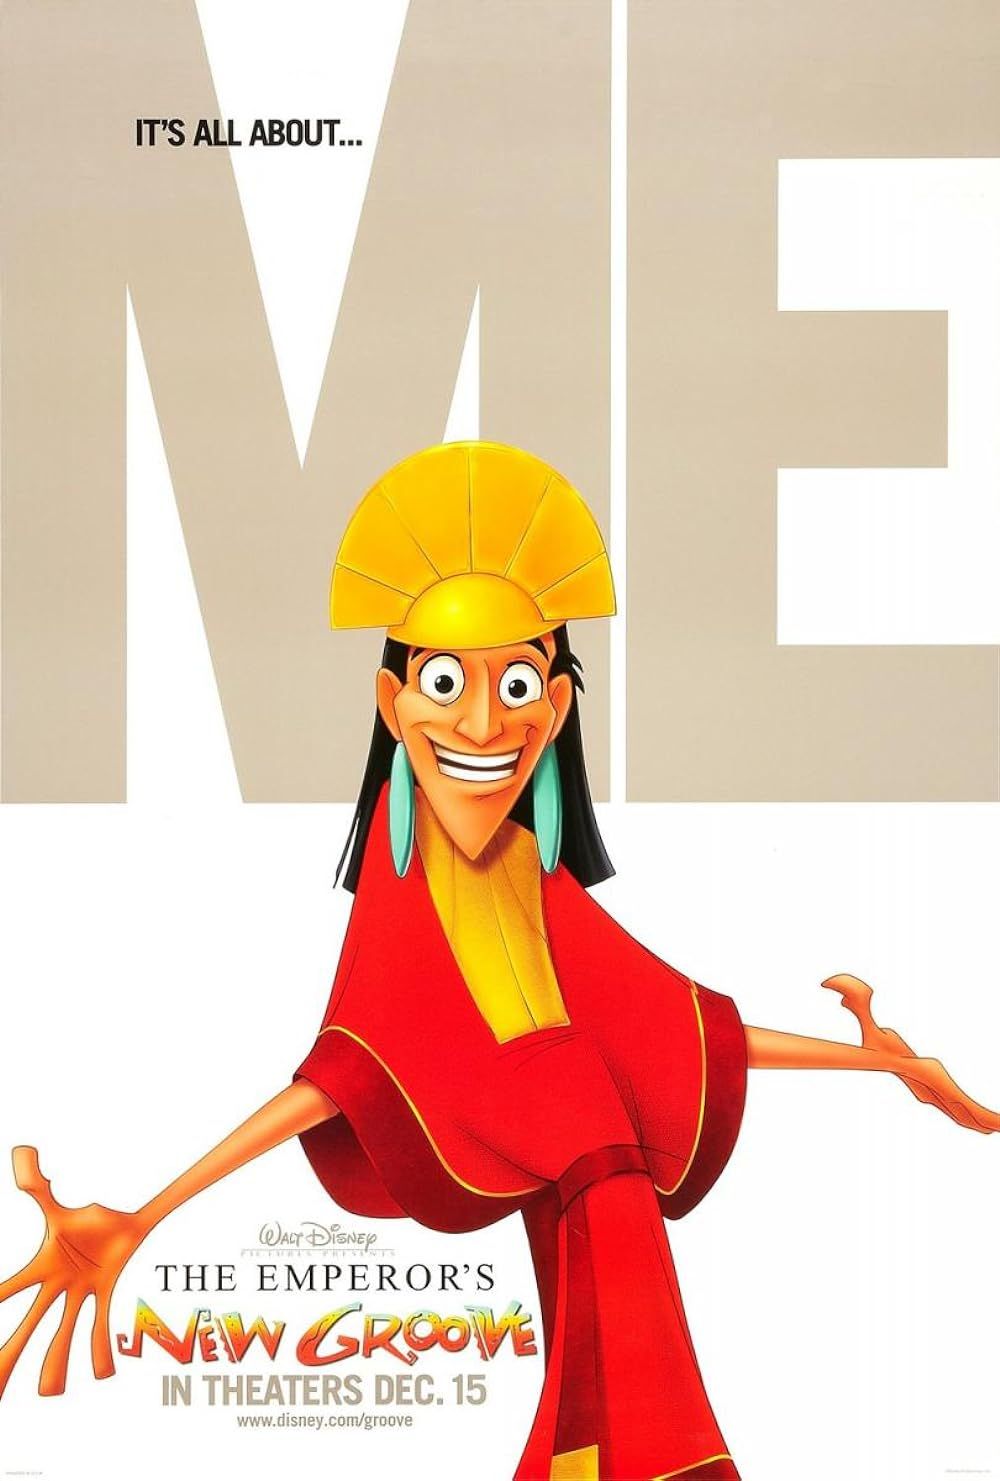 Kuzko posing with a big smile in The Emperor's New Groove movie poster